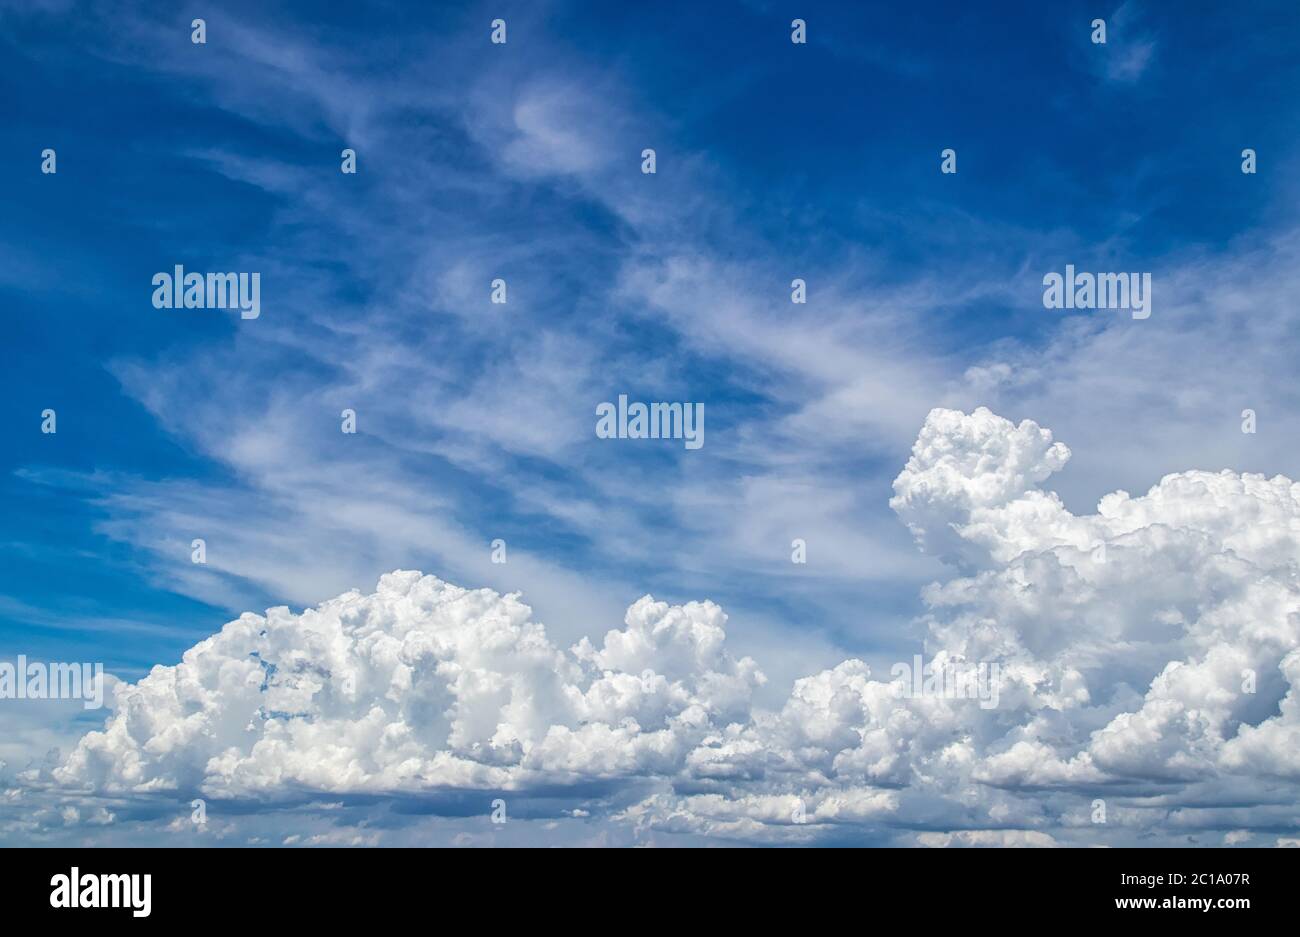 blue sky with white fluffy clouds. beauty nature scene background. Stock Photo